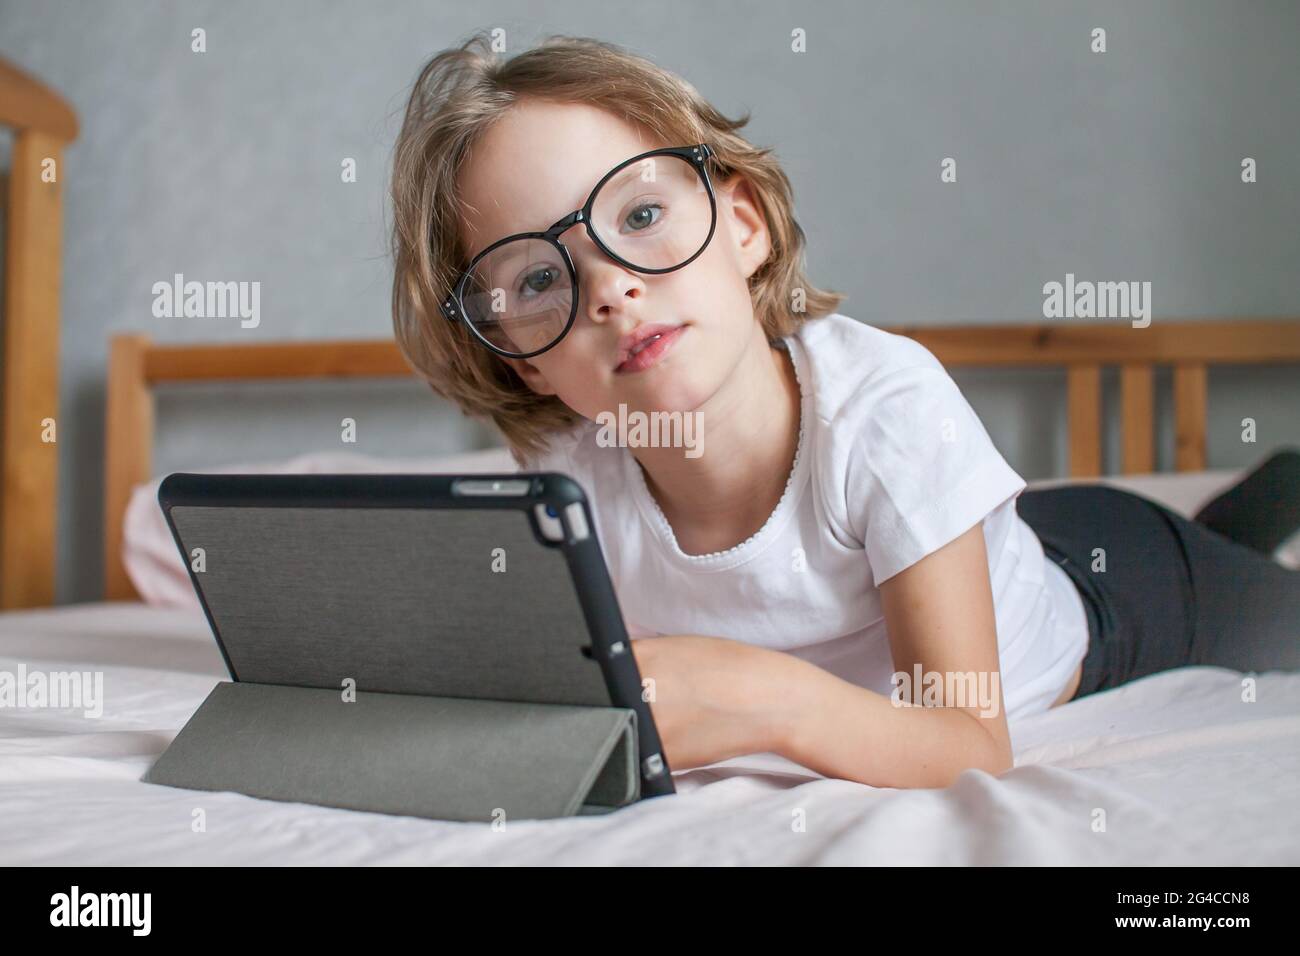 Girl Studying Pet High Resolution Stock Photography and Images - Alamy